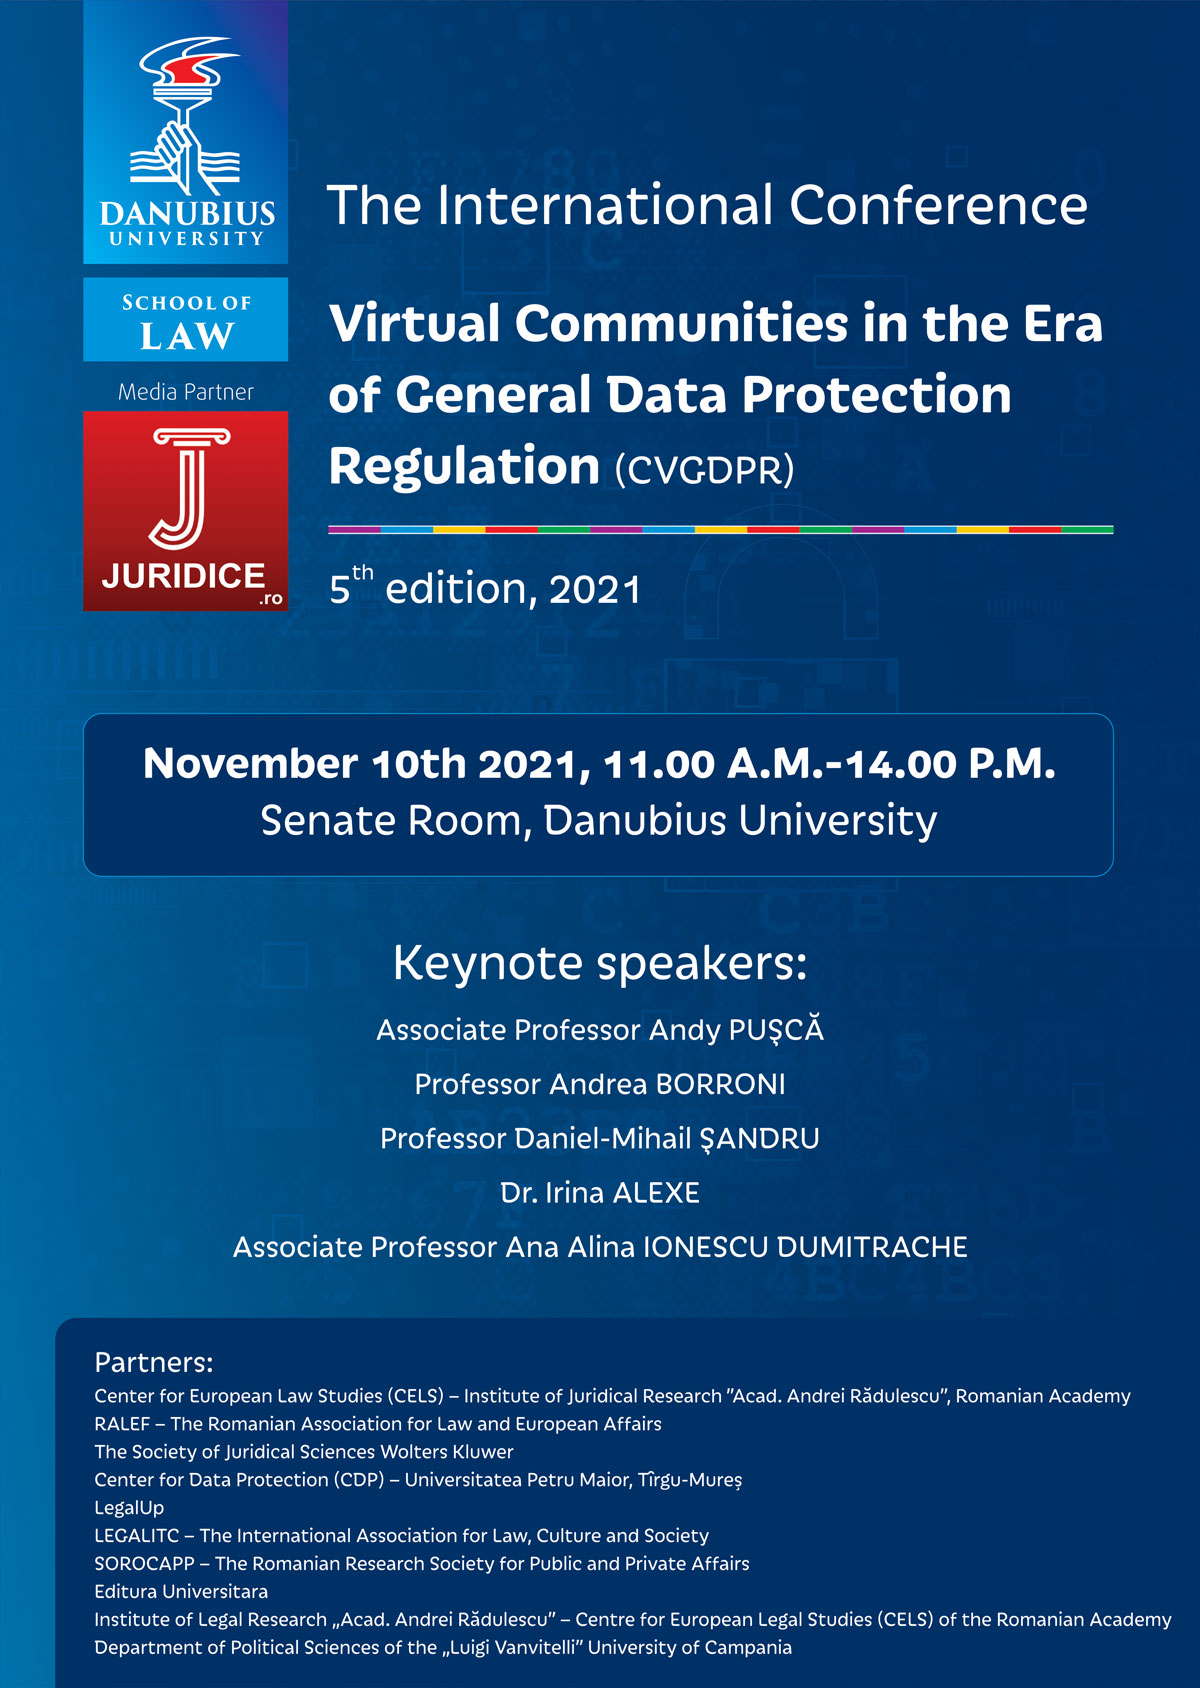 The International Conference: Virtual Communities in the Era of General Data Protection Regulation (VCGDPR) - The 5th Edition, 2021